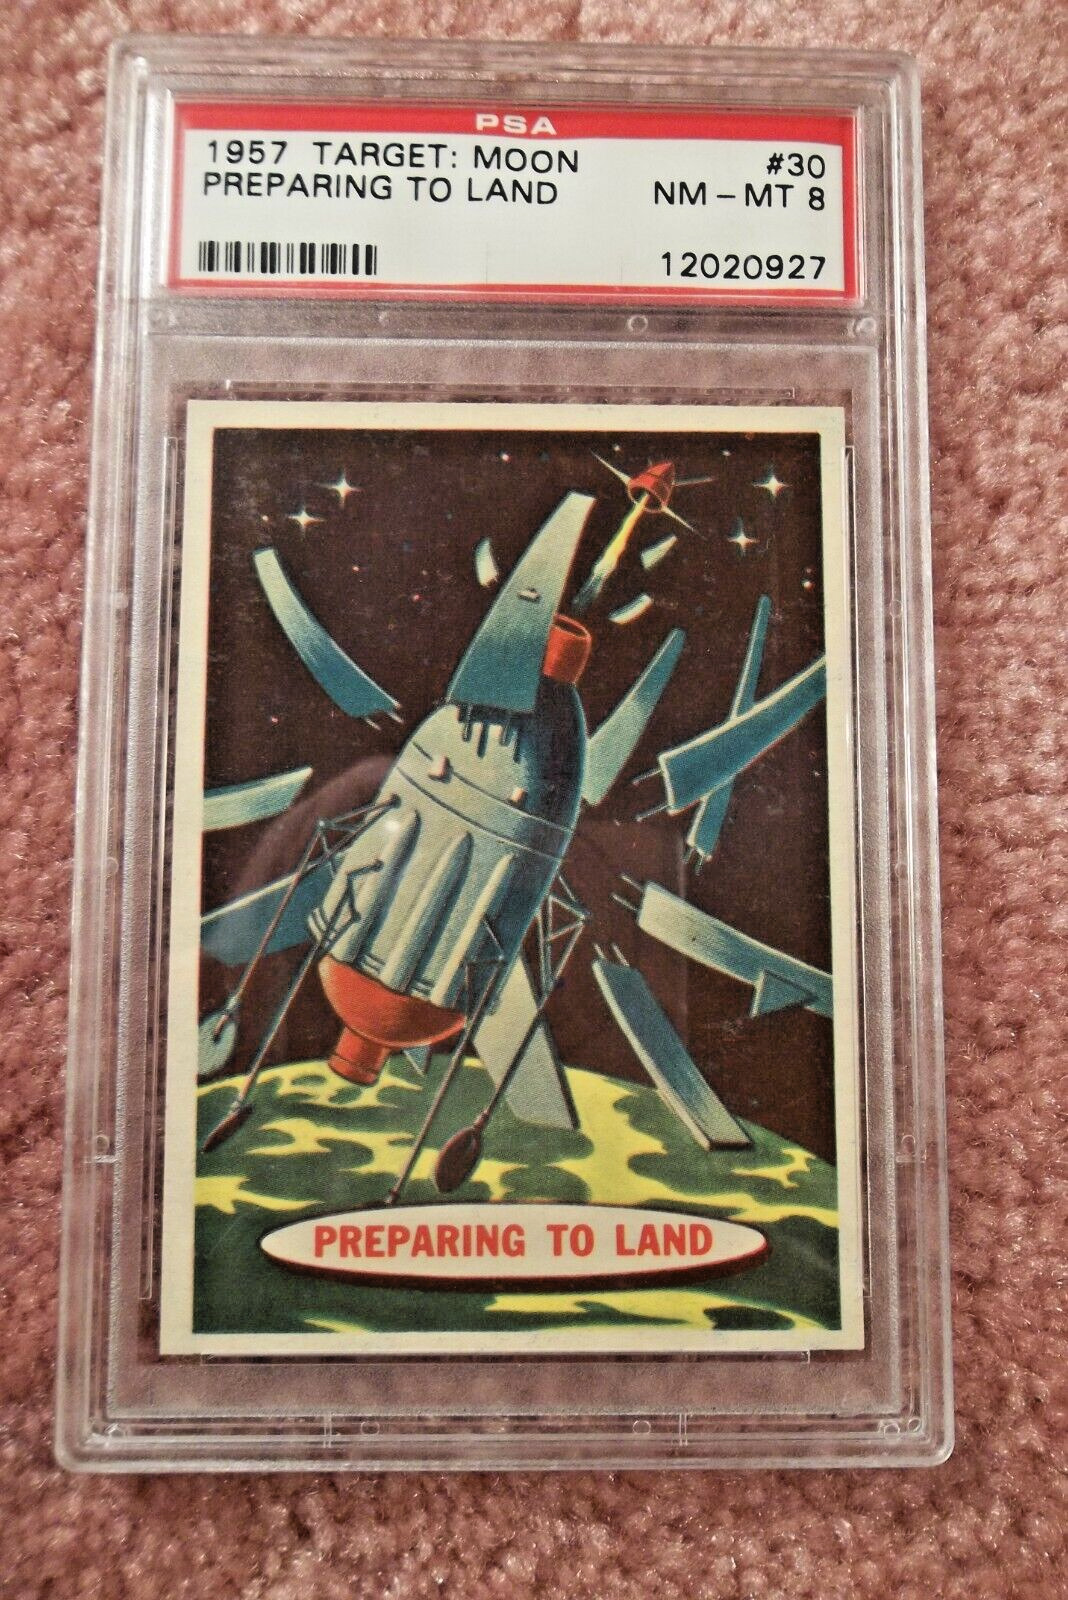 1957 TOPPS TARGET MOON # 30 PREPARING TO LAND PSA 8 NM-MINT SPACE COLLECTABLE